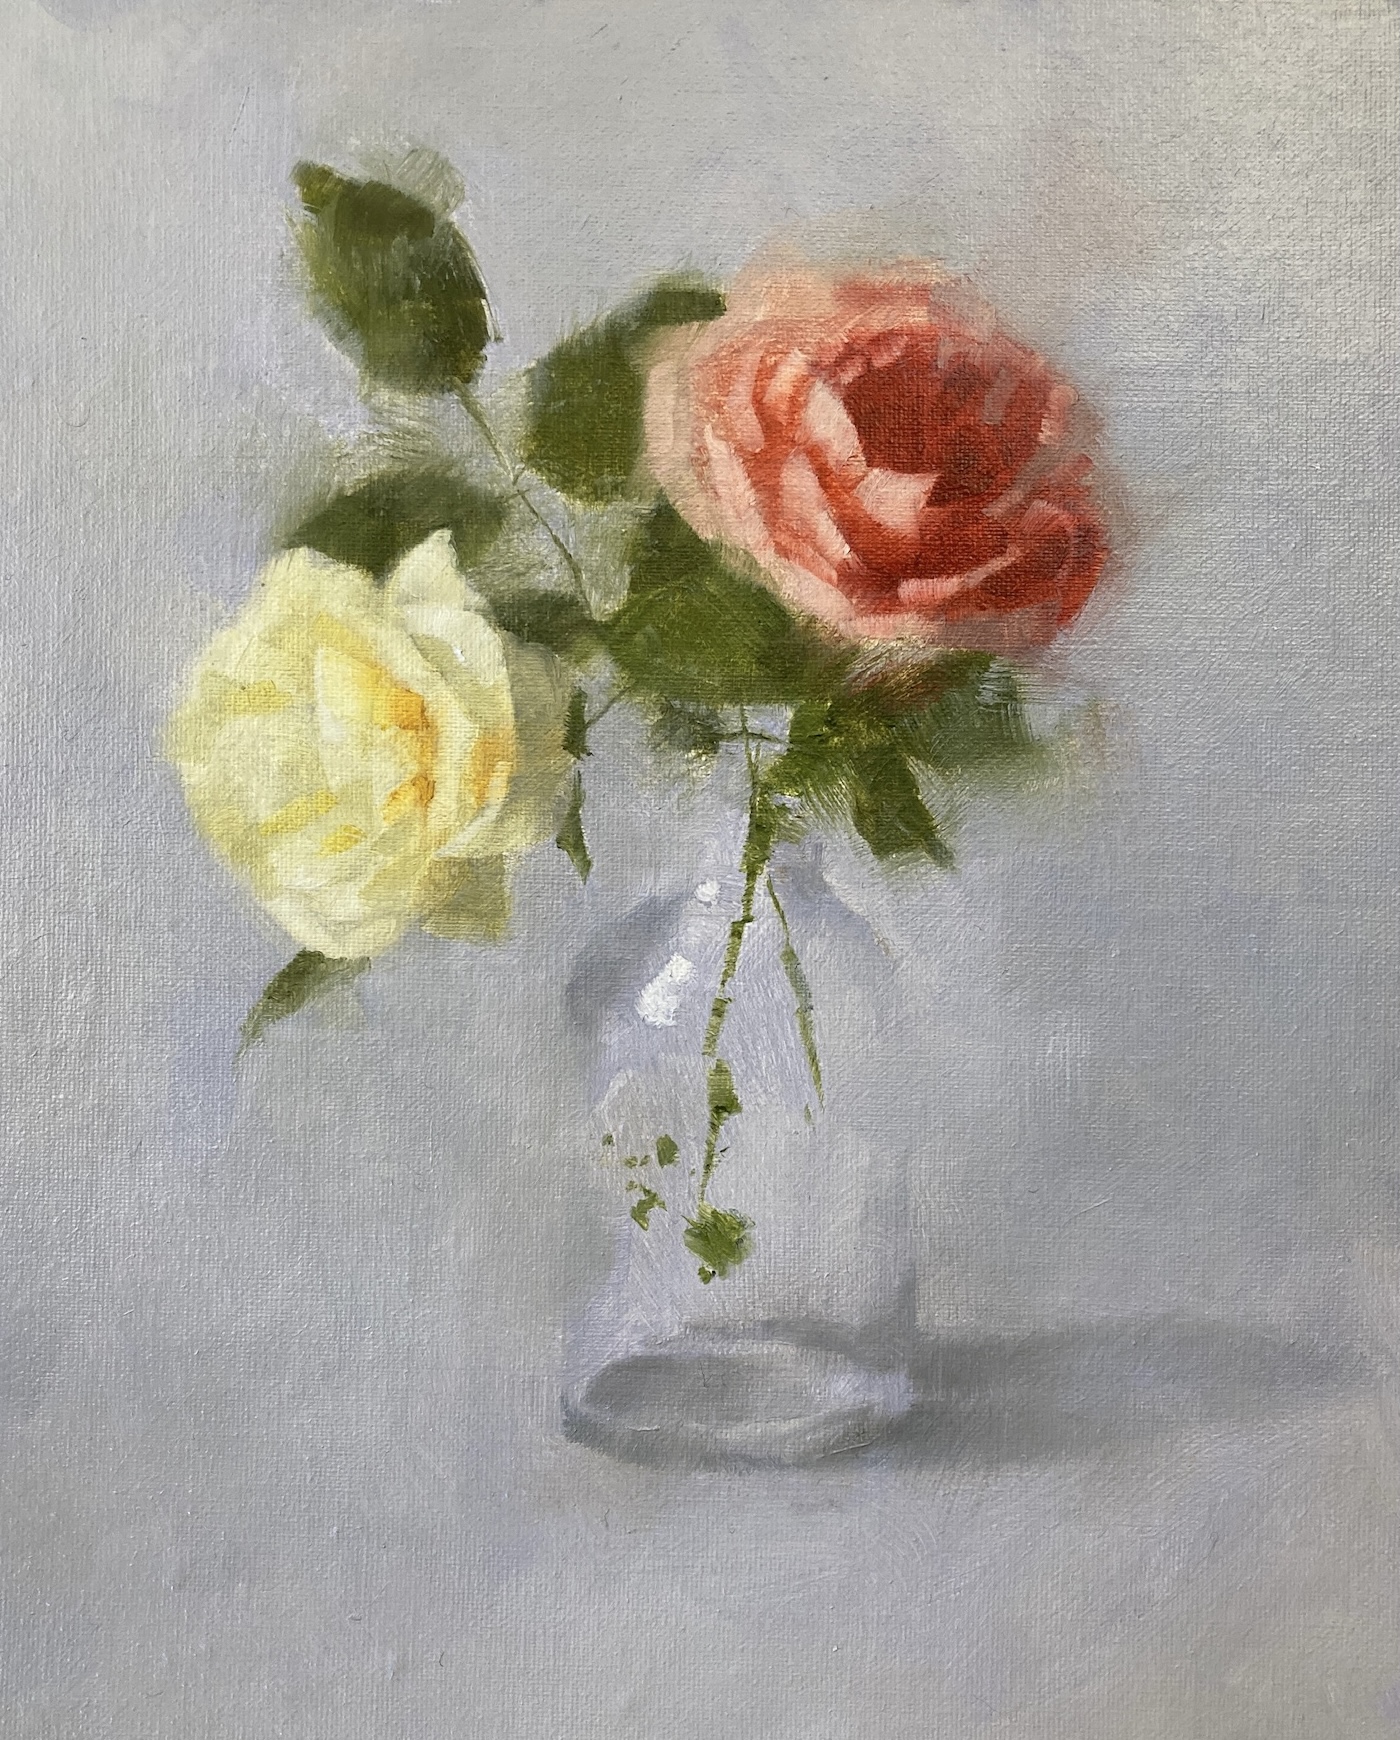 David Austin rose oil painting by Michele Clamp